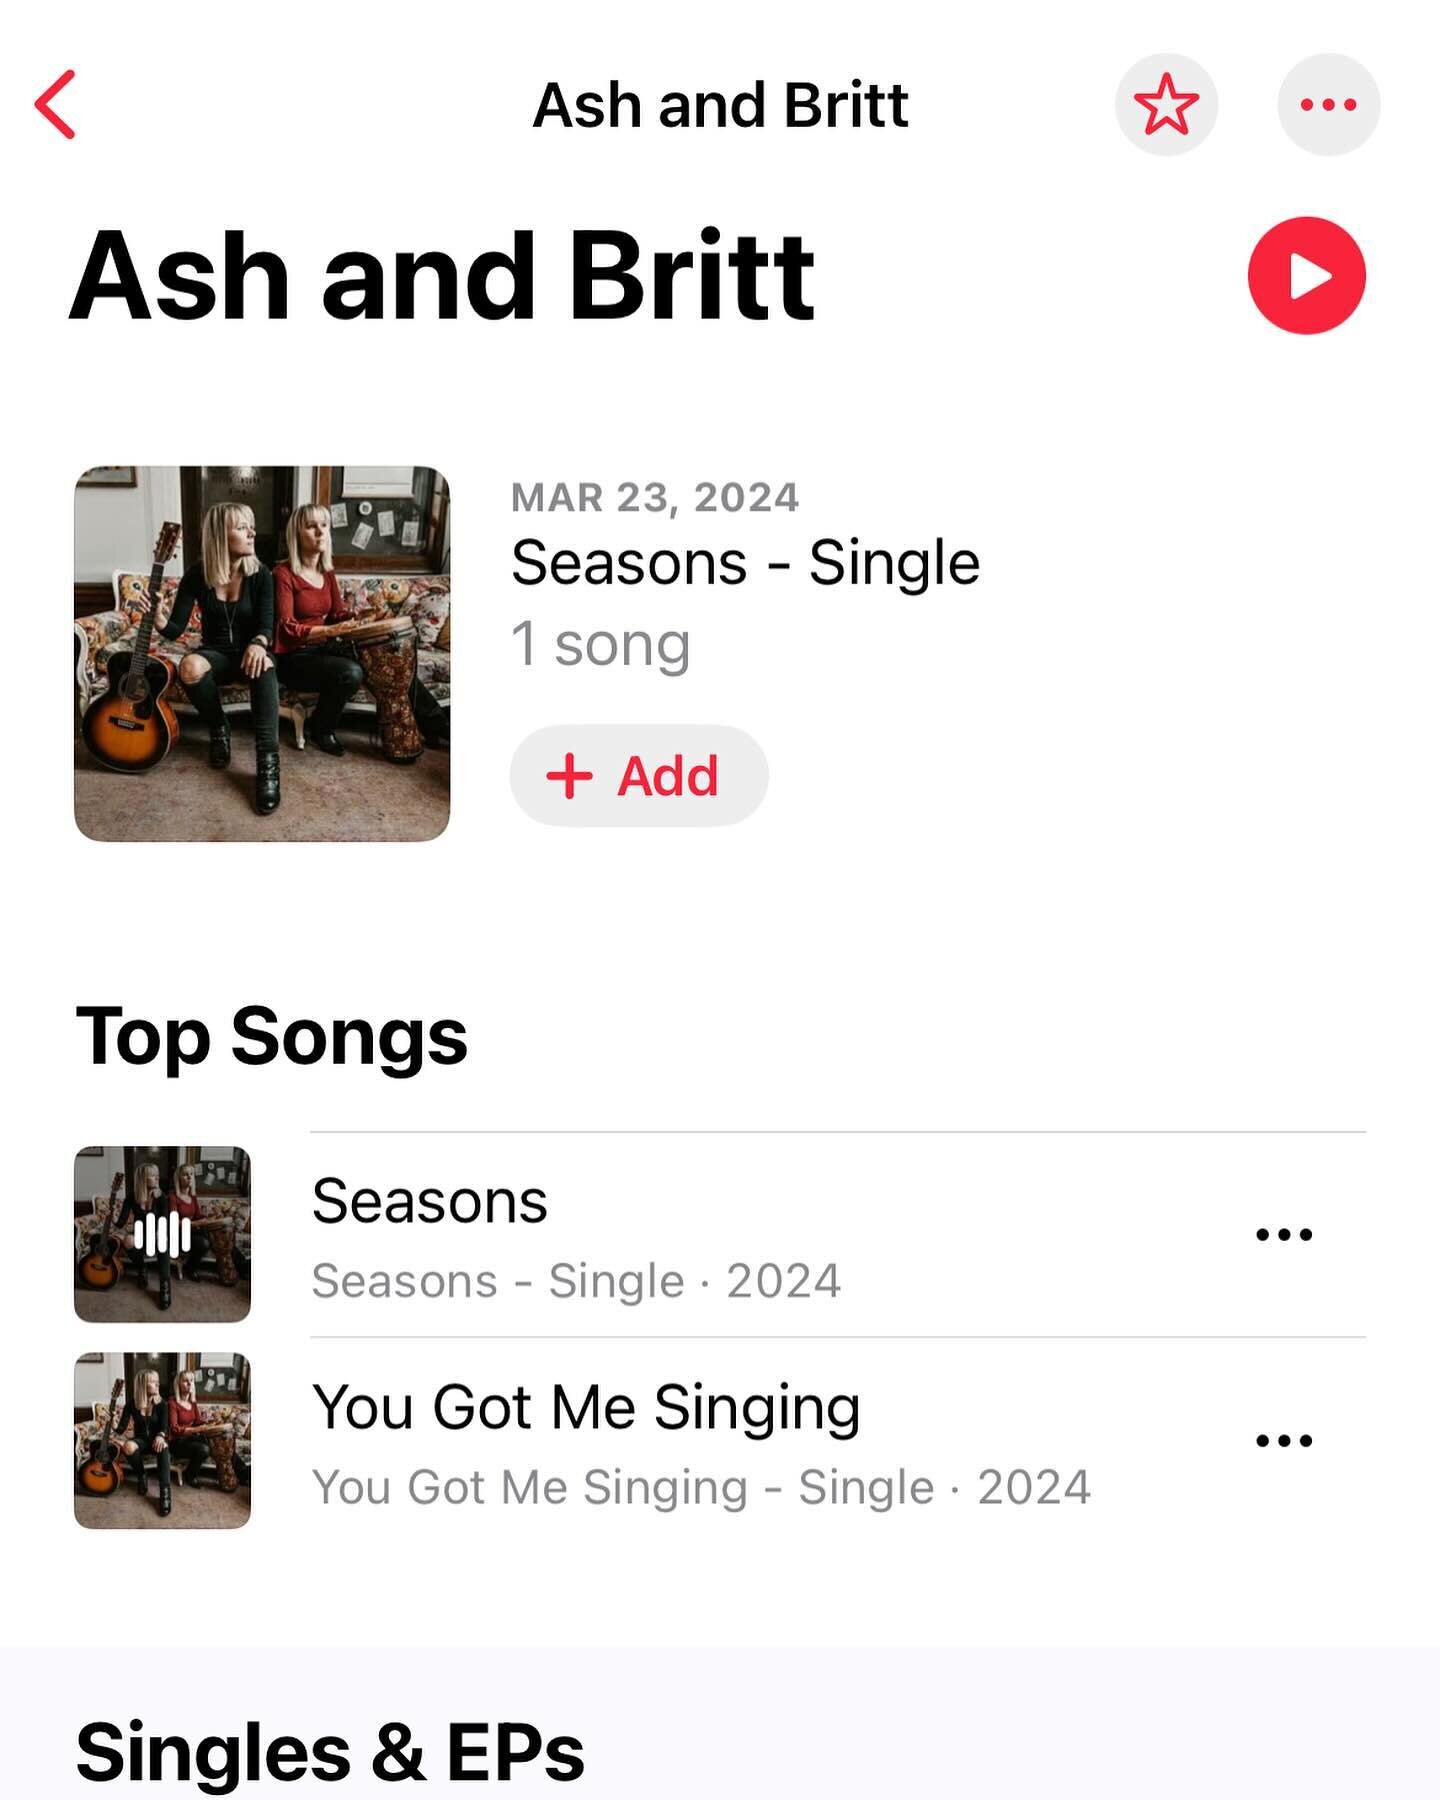 @ashandbrittmusic is officially available on your favorite streaming platforms!!! Check them out!